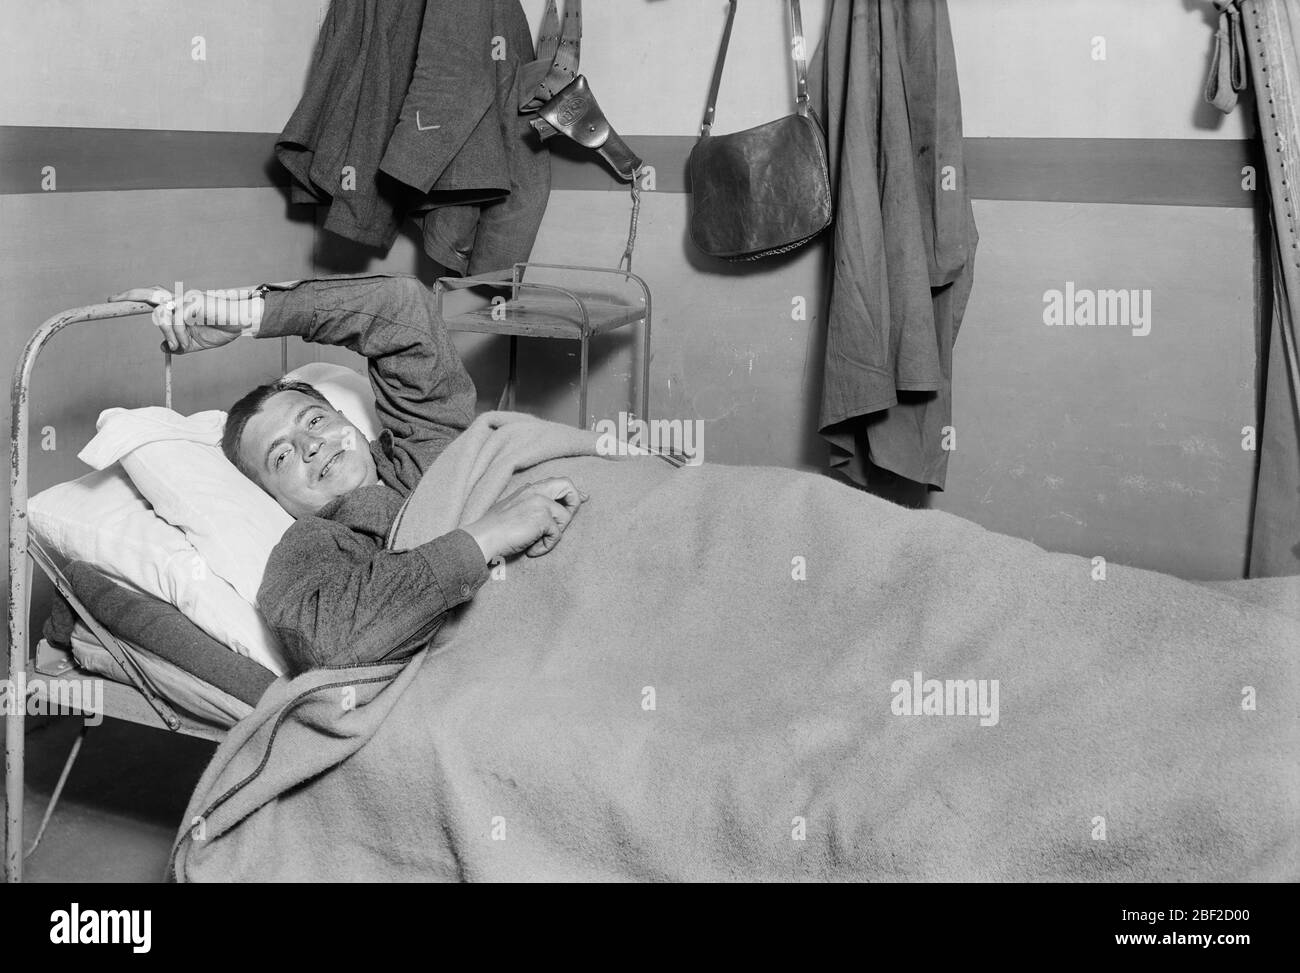 American Soldier resting at American Red Cross Canteen, Chateauroux, France, Lewis Wickes Hine, American National Red Cross Photograph Collection, October 1918 Stock Photo